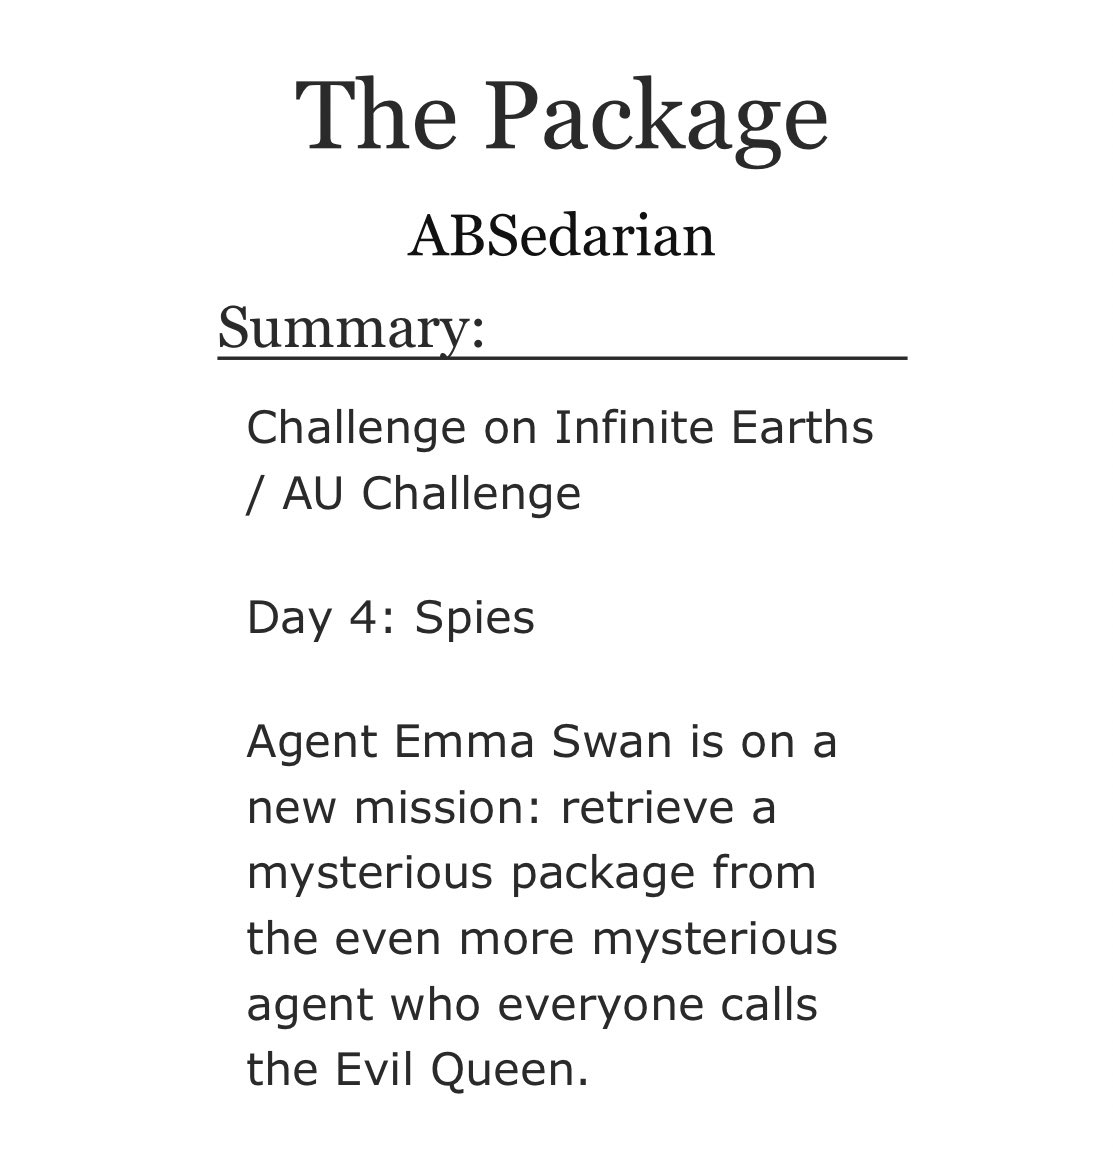 April 9: The Package by ABSedarian  https://archiveofourown.org/works/3889570  This is another installment n the thirty day series.